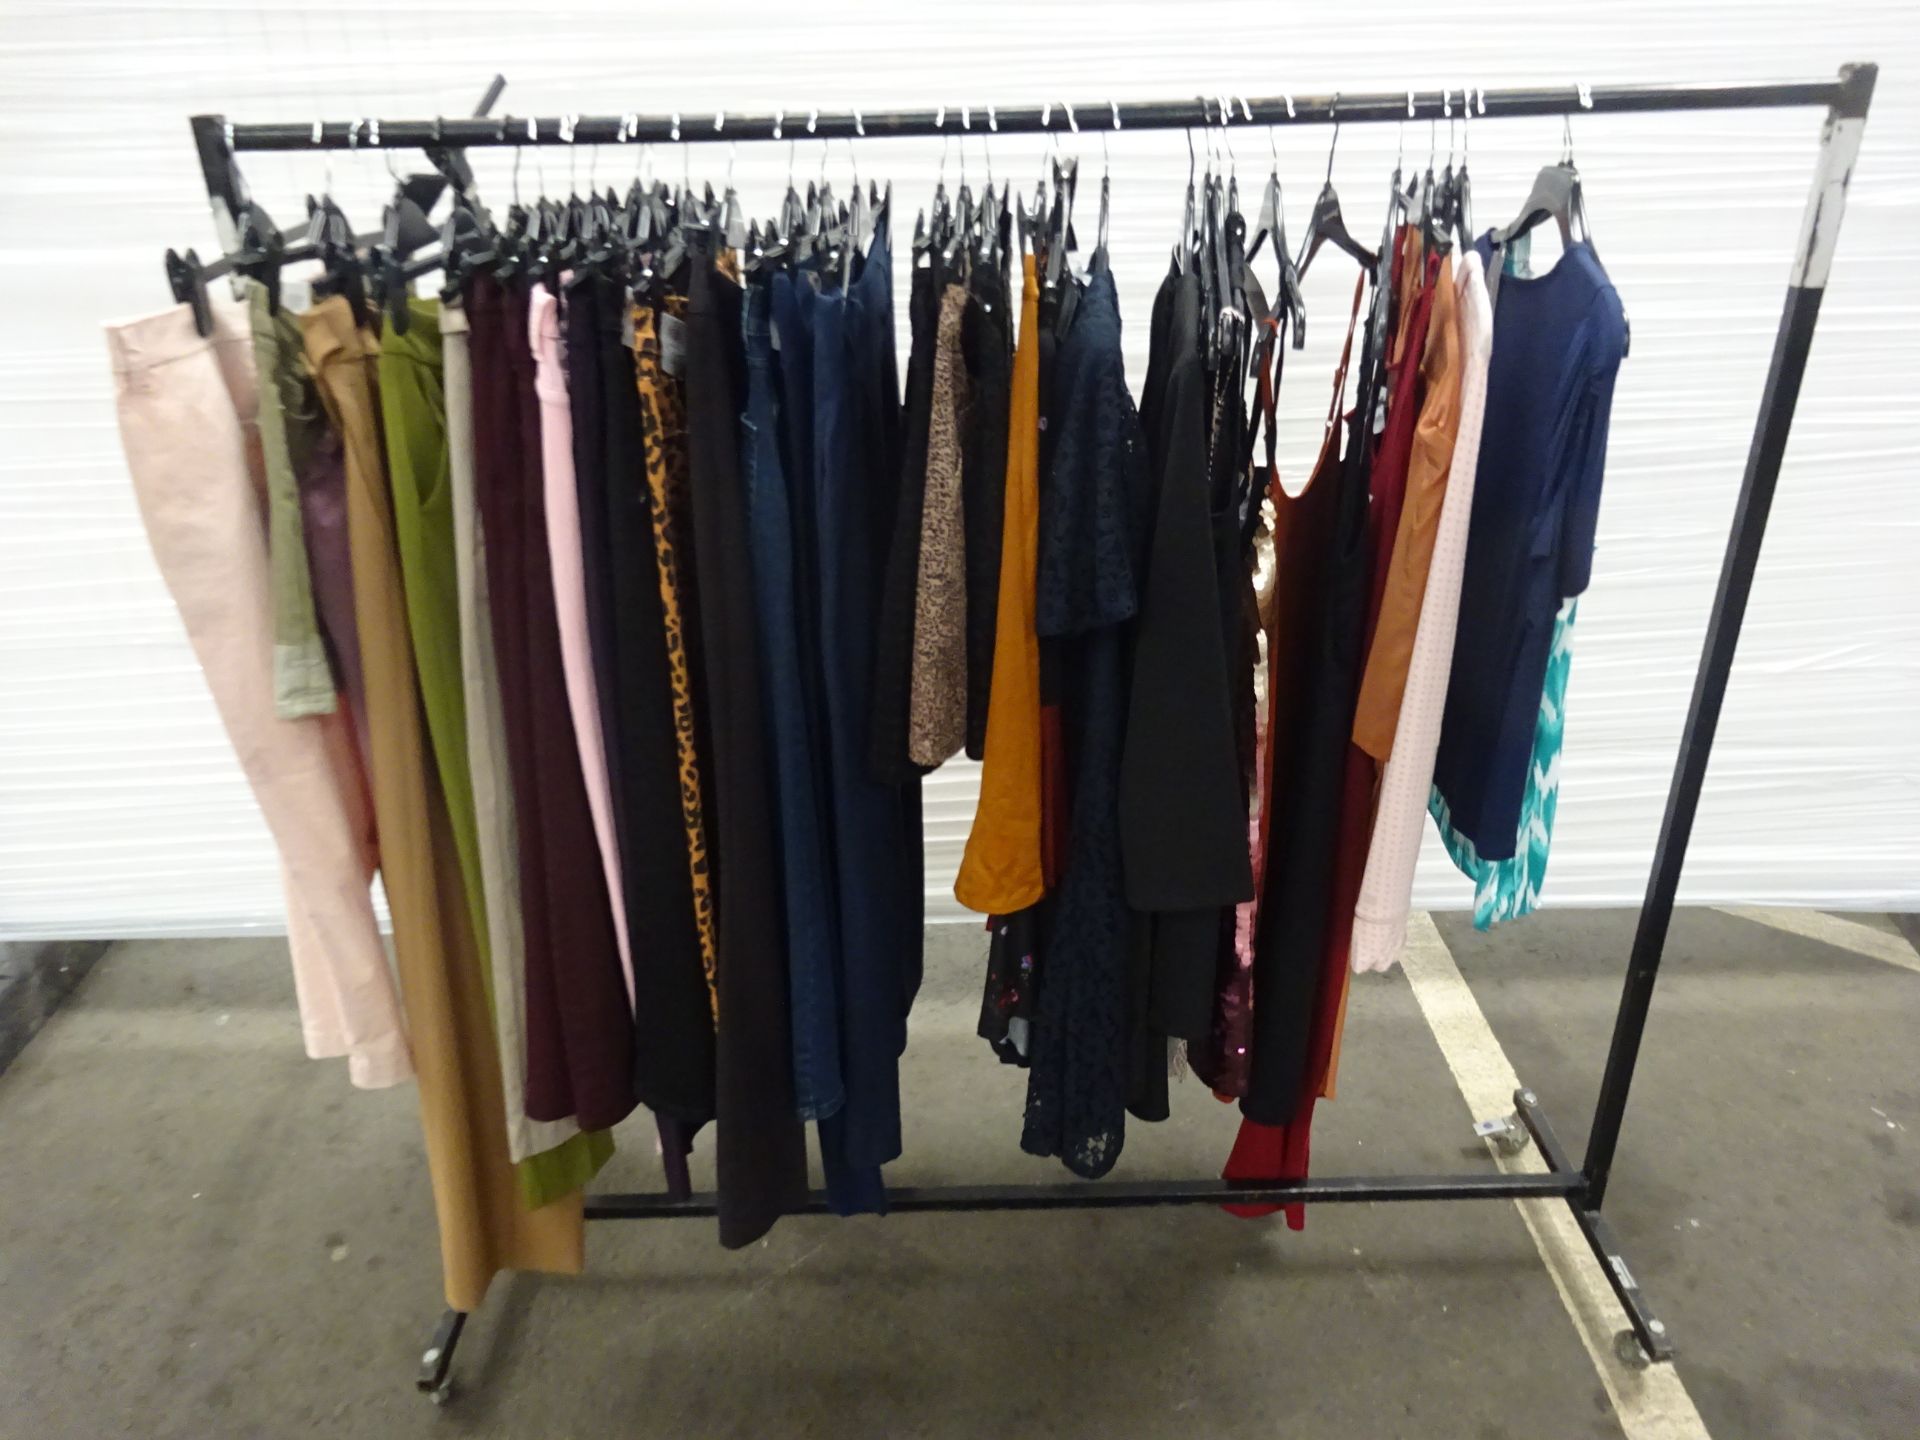 APPROX 500PCS OF DEBENHAMS WOMENS CLOTHING WITH AN APPROX RRP OF £20,000. - Image 7 of 18